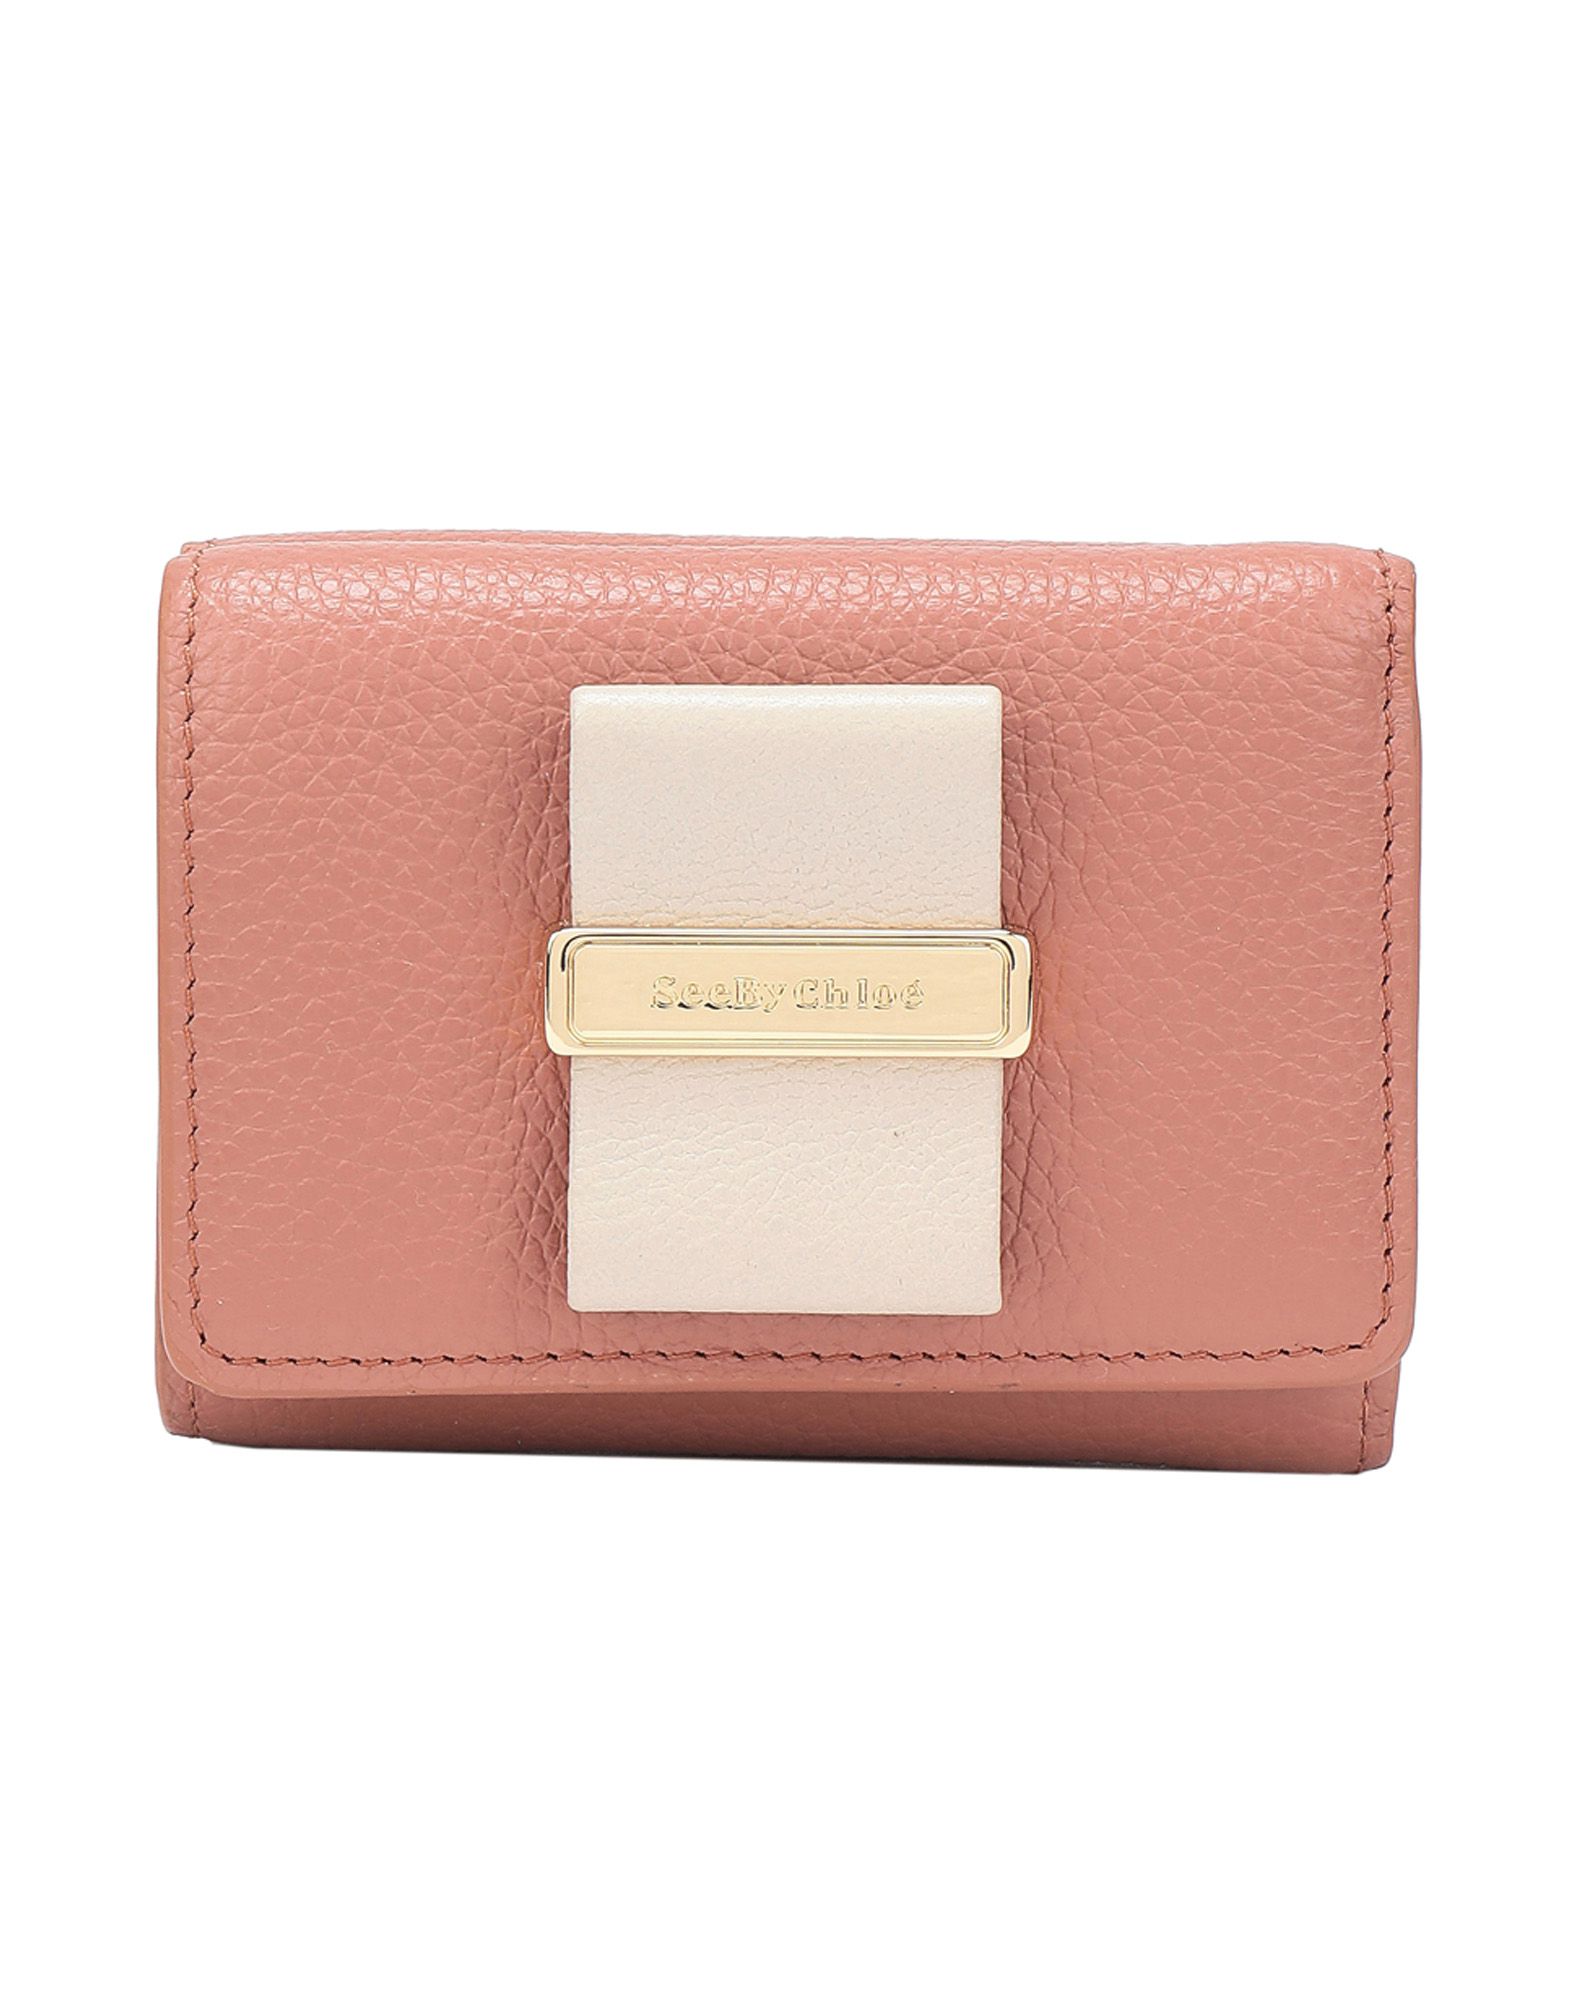 SEE BY CHLOÉ WALLETS,46594215UV 1